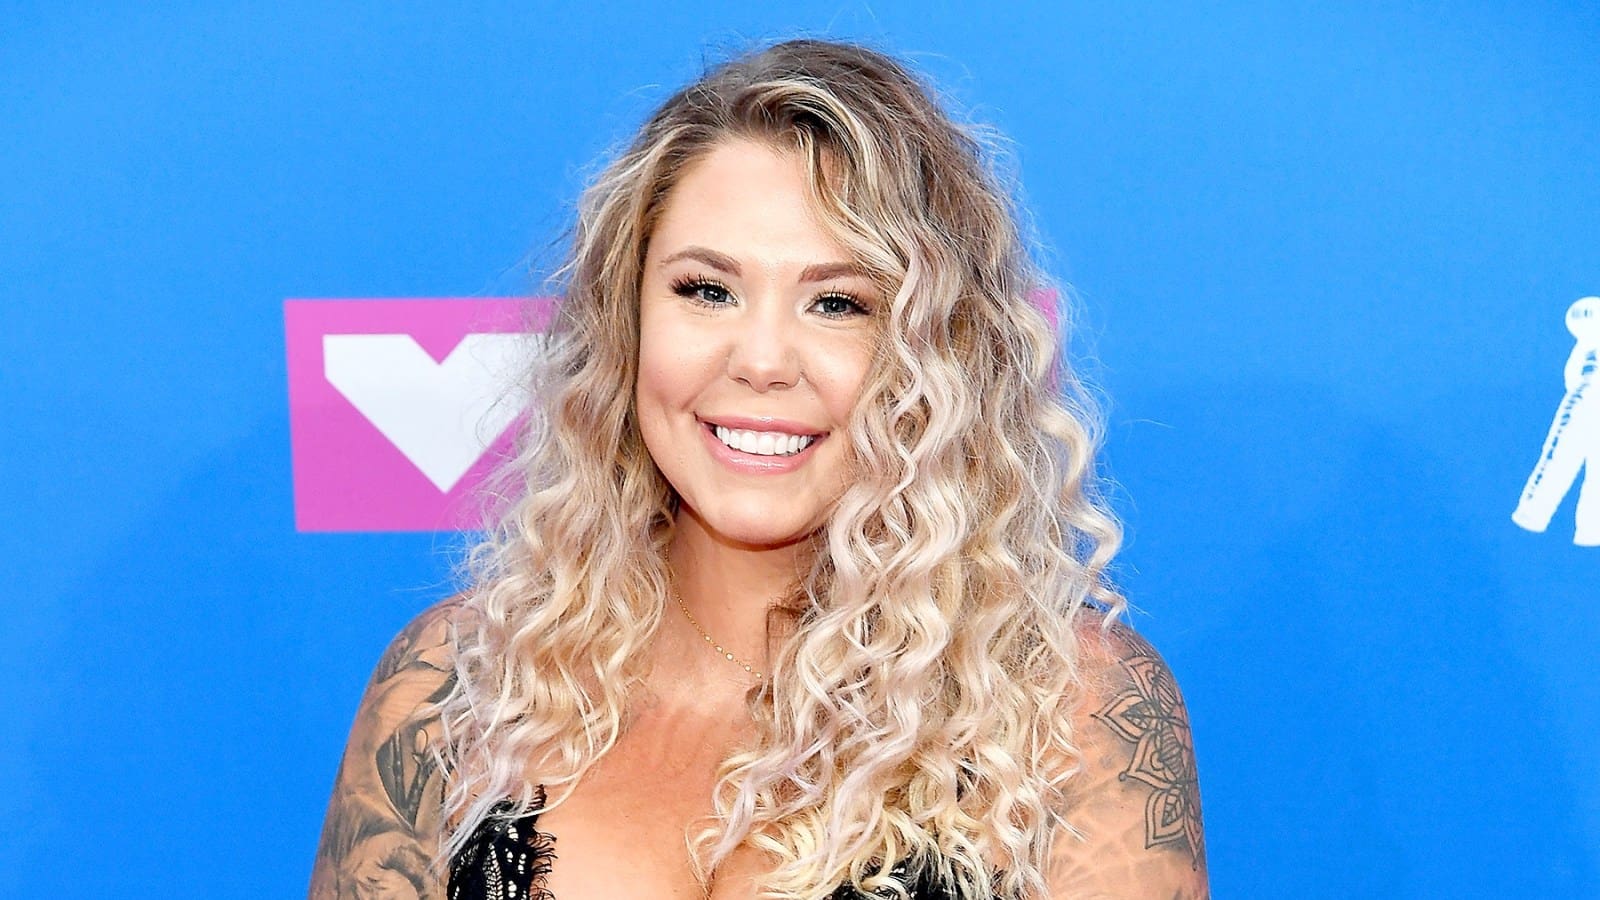 Kailyn-Lowry